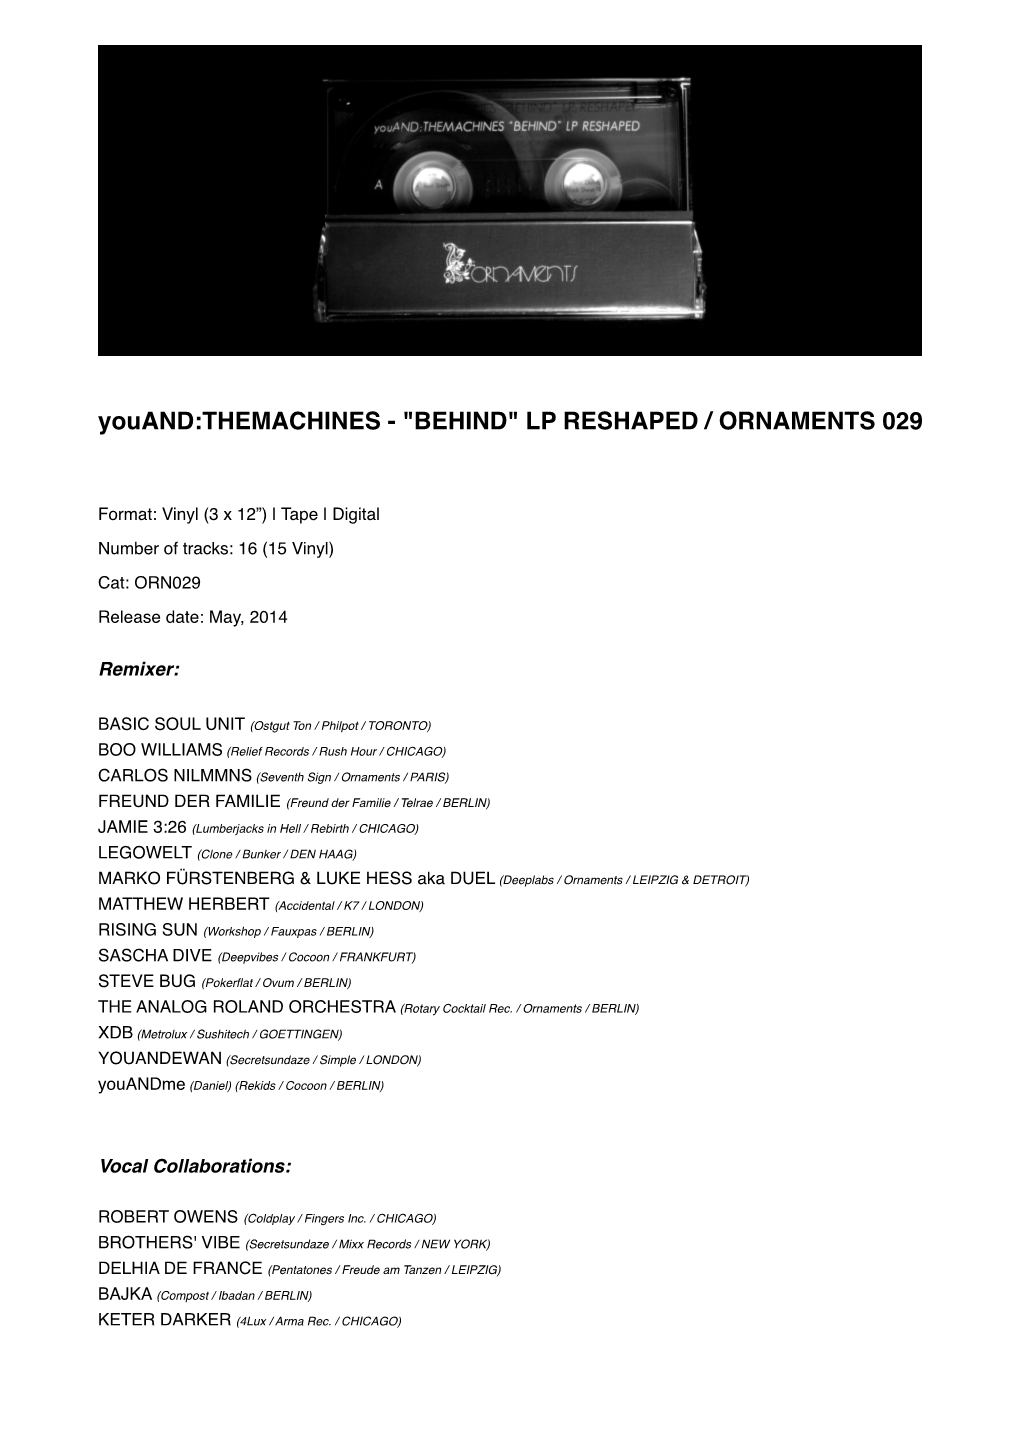 Youand:THEMACHINES - "BEHIND" LP RESHAPED / ORNAMENTS 029